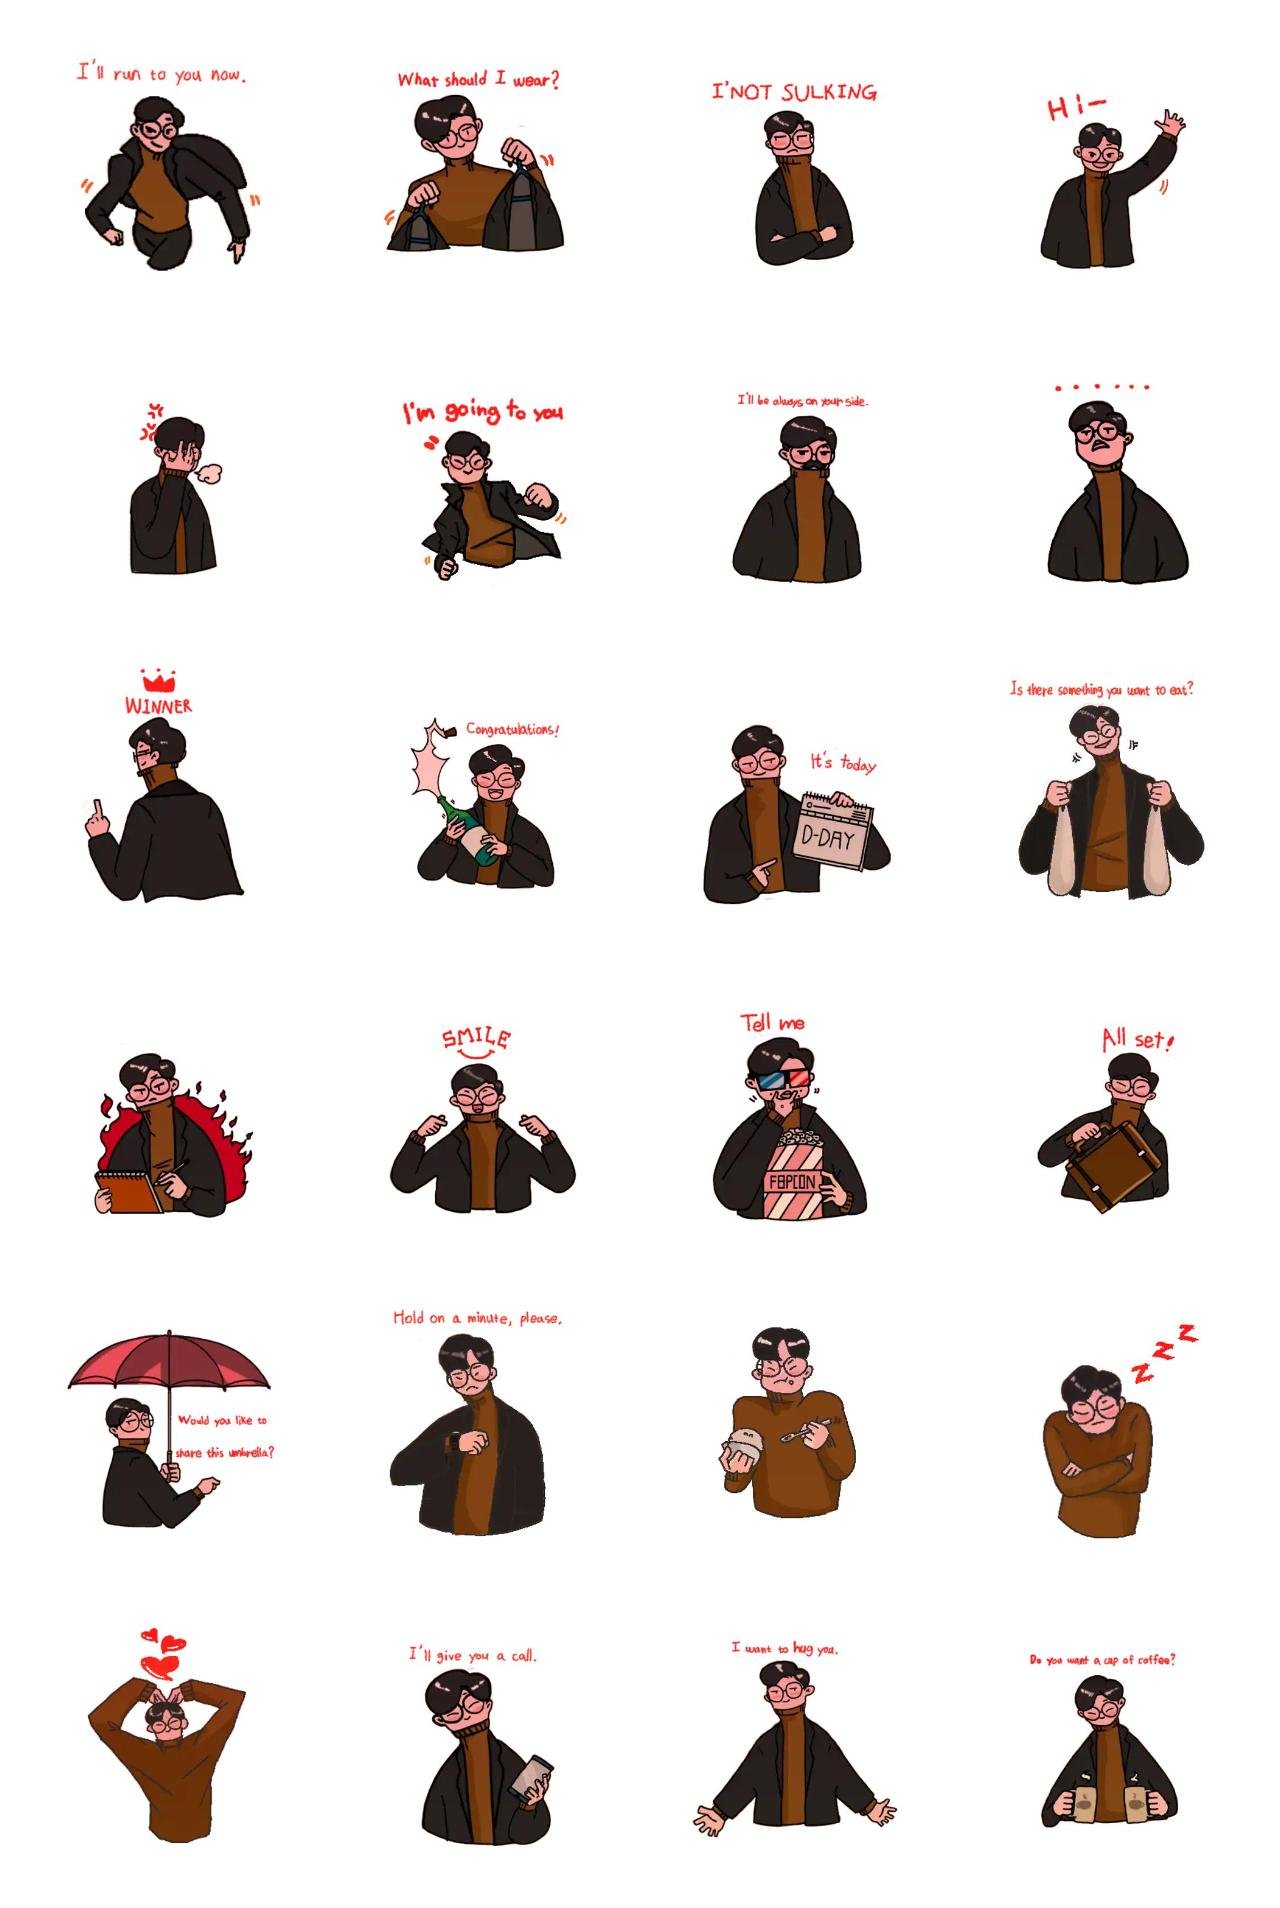 Your warm boyfriend Romance sticker pack for Whatsapp, Telegram, Signal, and others chatting and message apps